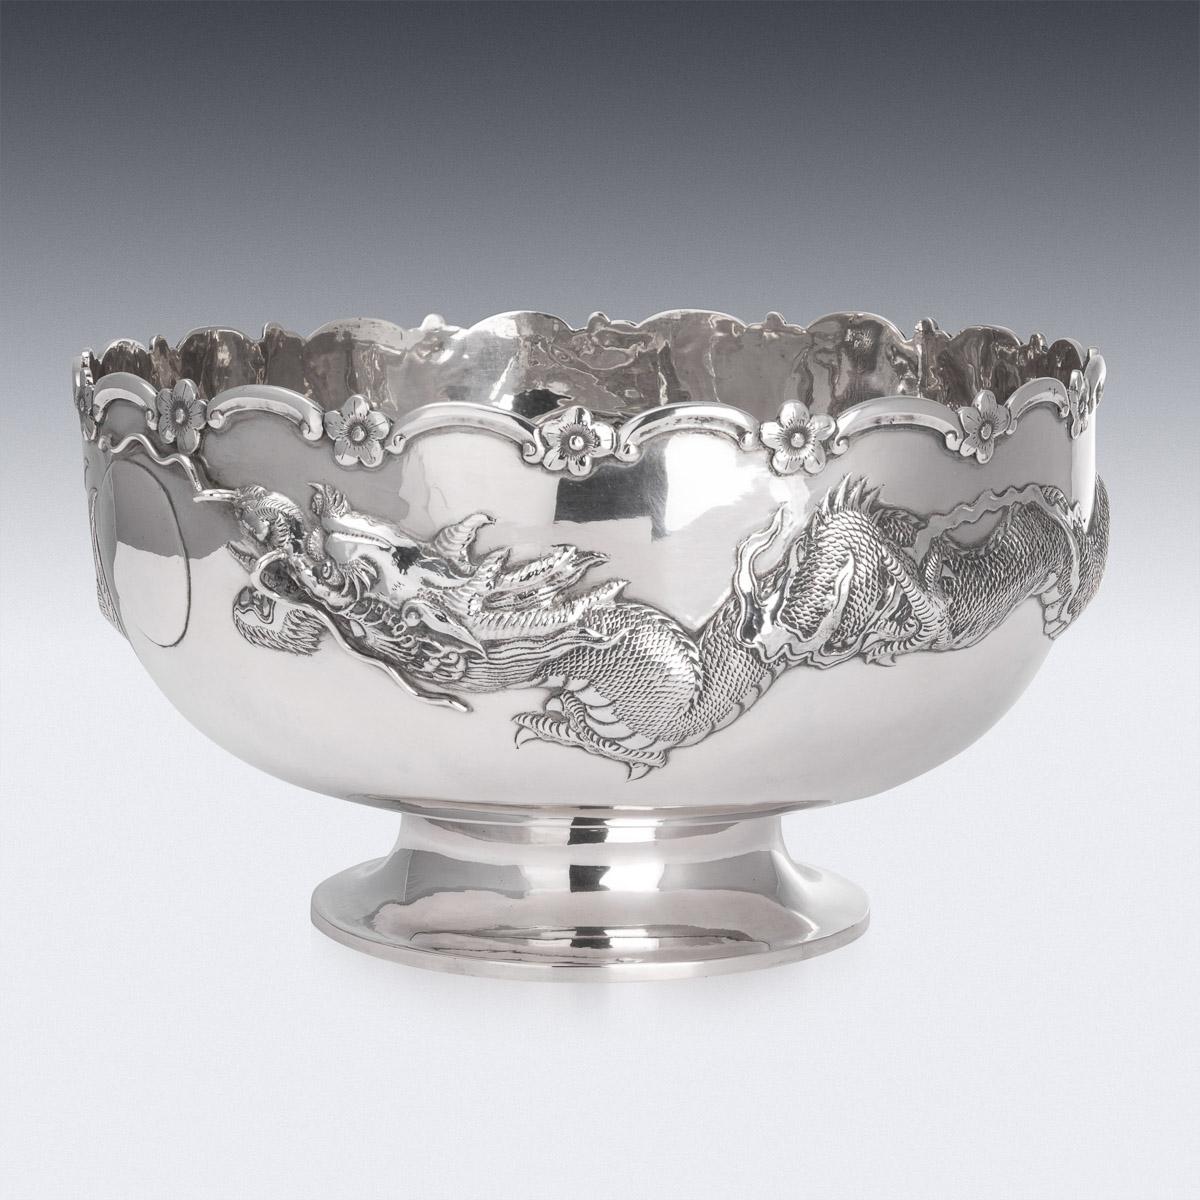 Antique late-19th century Chinese export solid silver bowls, very large and of traditional form, hand chased with a large dragon in relief chasing the pearl of wisdom, the design is particularly well modelled and detailed, the growling face applied